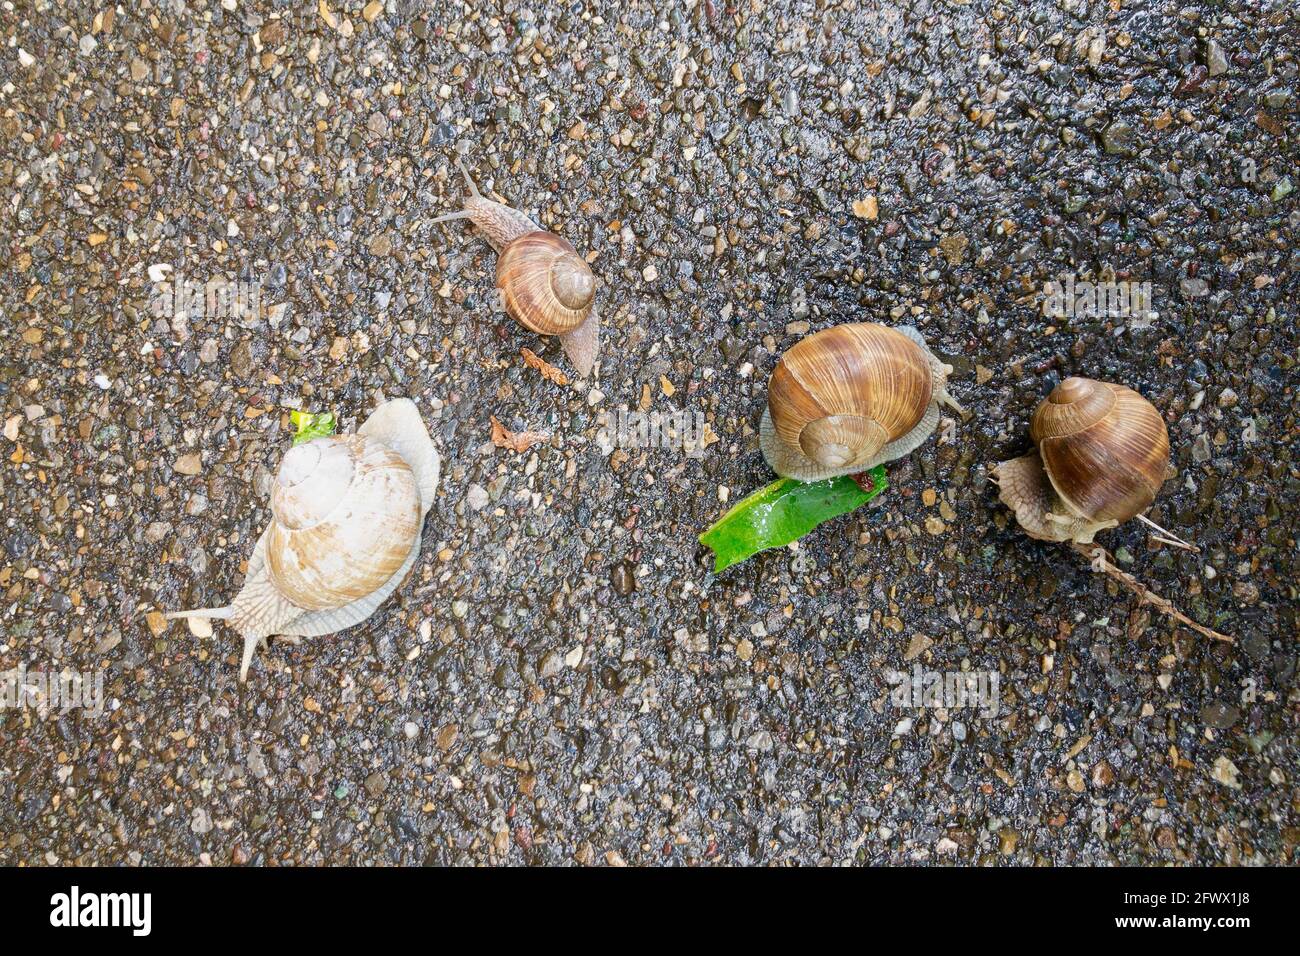 Top view of four Helix Pomatia snails crawling on a street in Switzerland Stock Photo